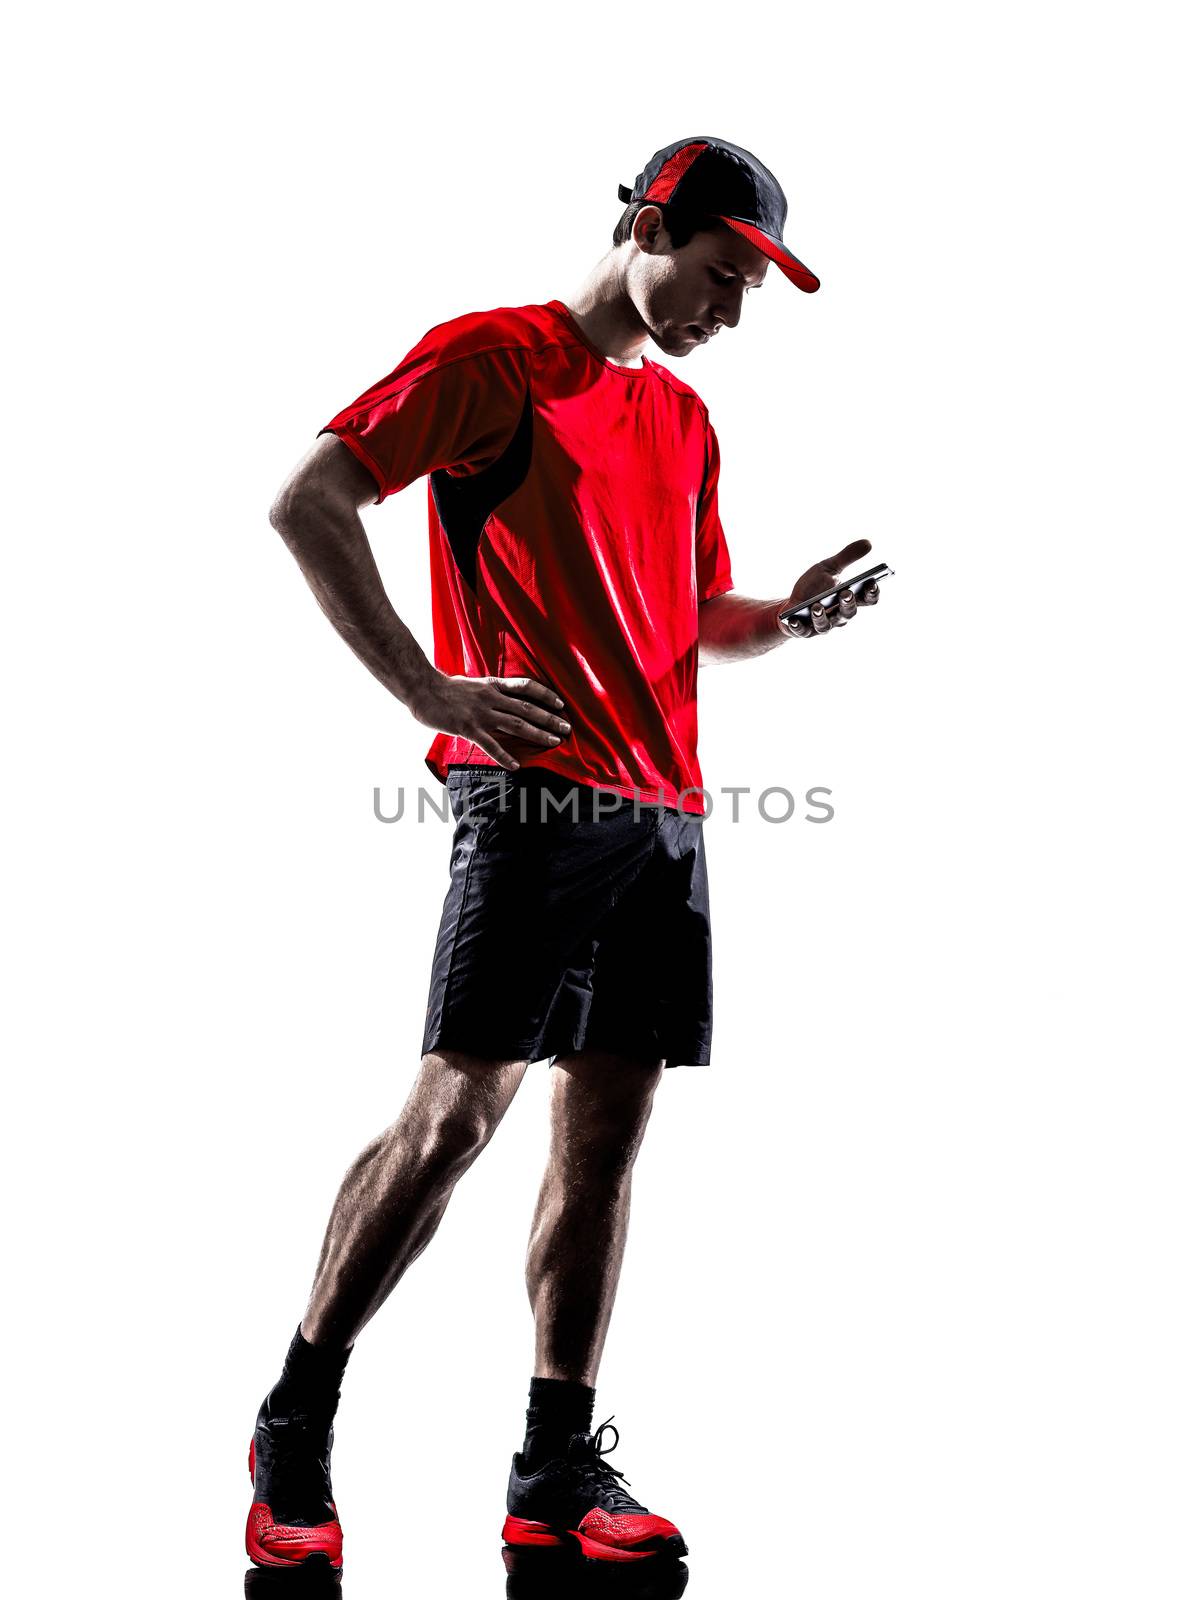 runners joggers smartphones headphones silhouettes by PIXSTILL